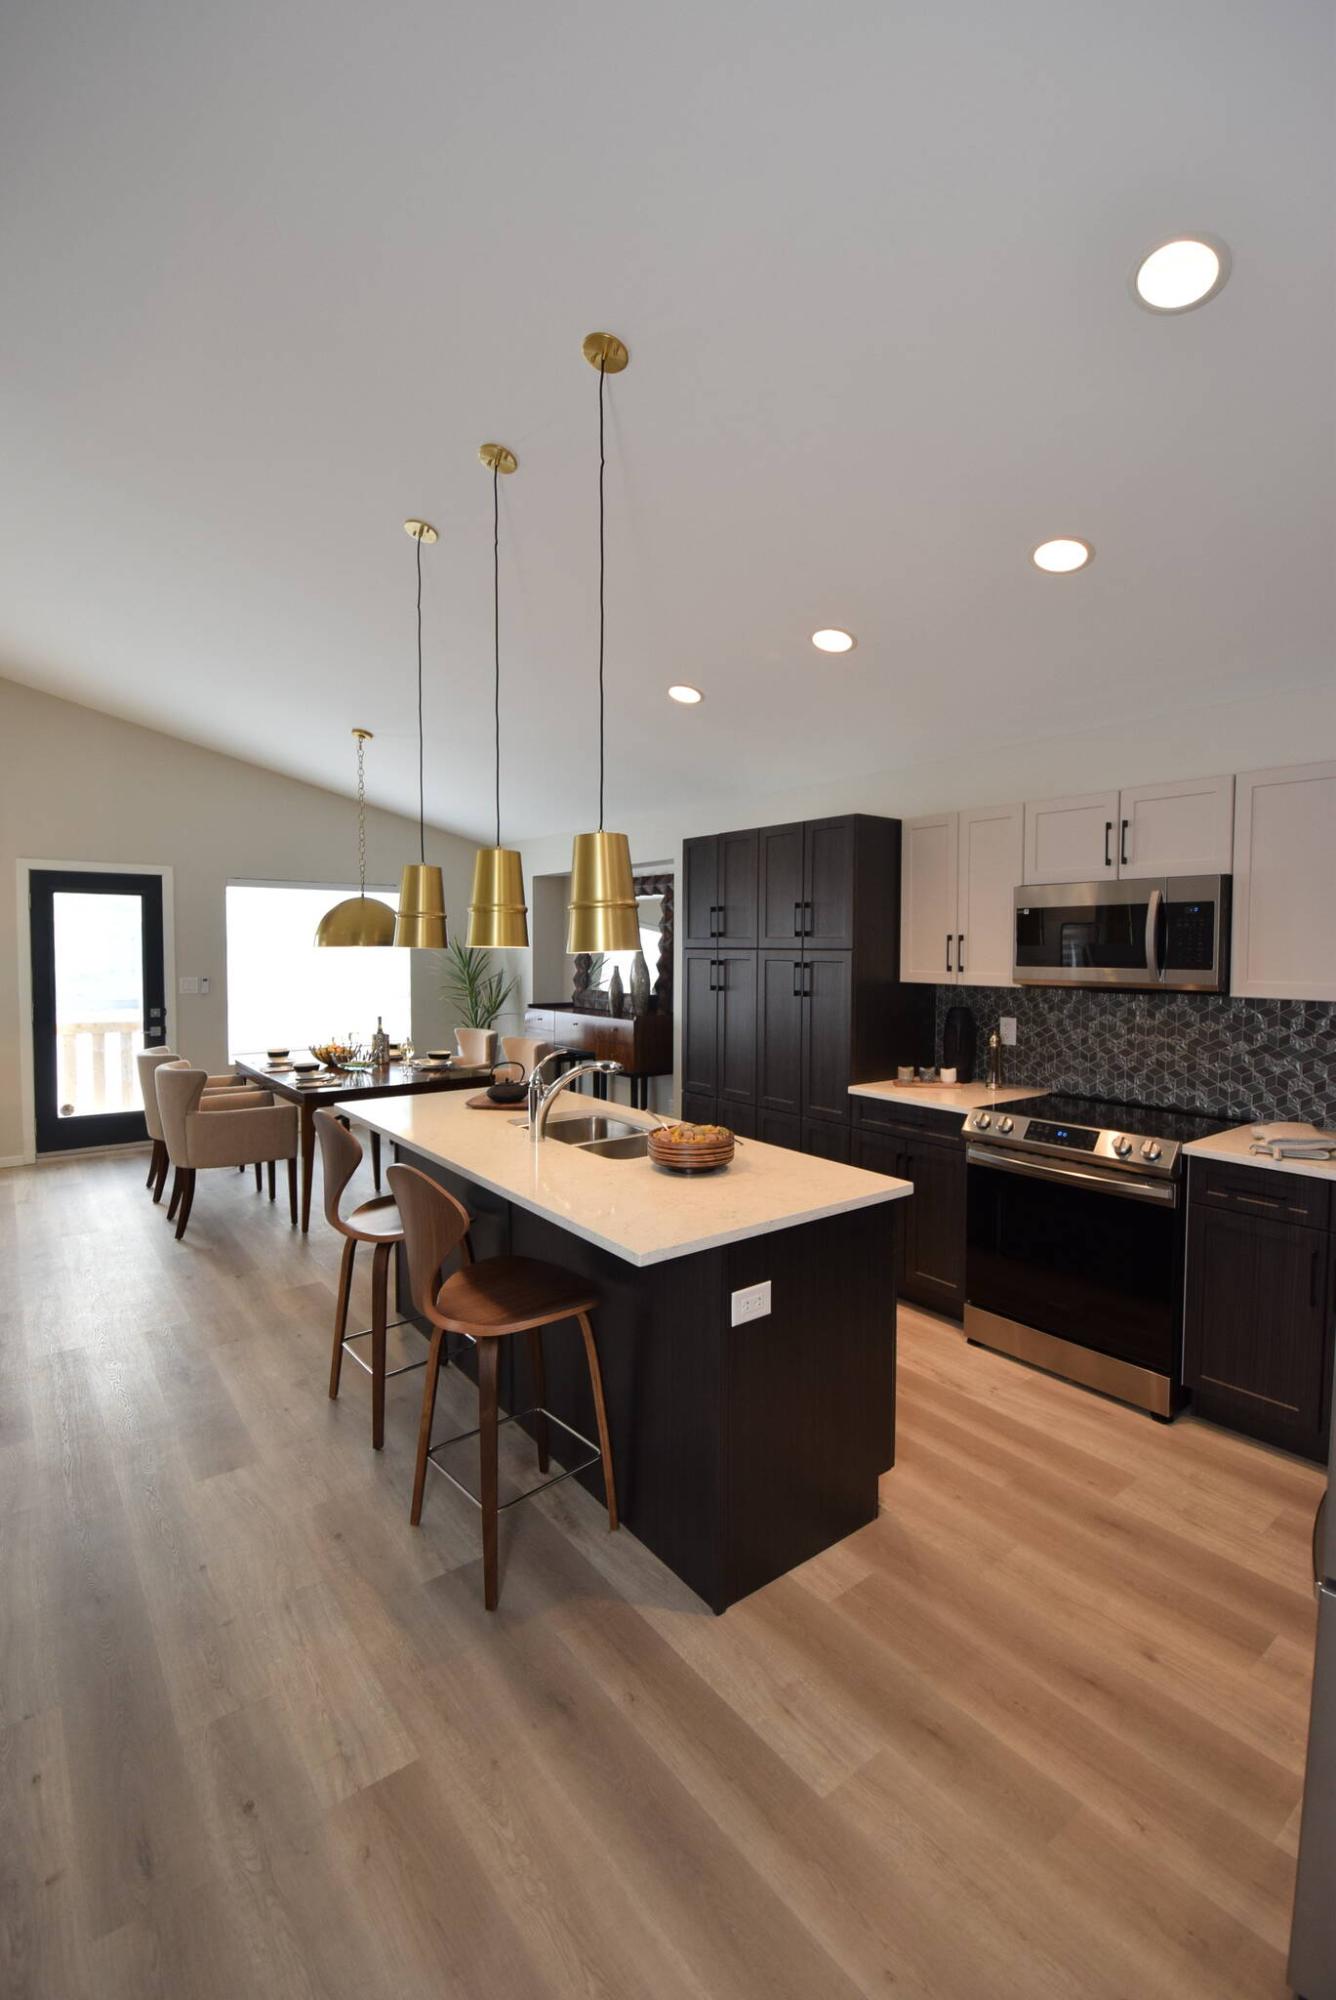  <p>Todd Lewys / Winnipeg Free Press</p>
                                <p>Manitoba home builders are featuring more than 120 new homes at the MHBA Spring Parade of Homes.</p> 